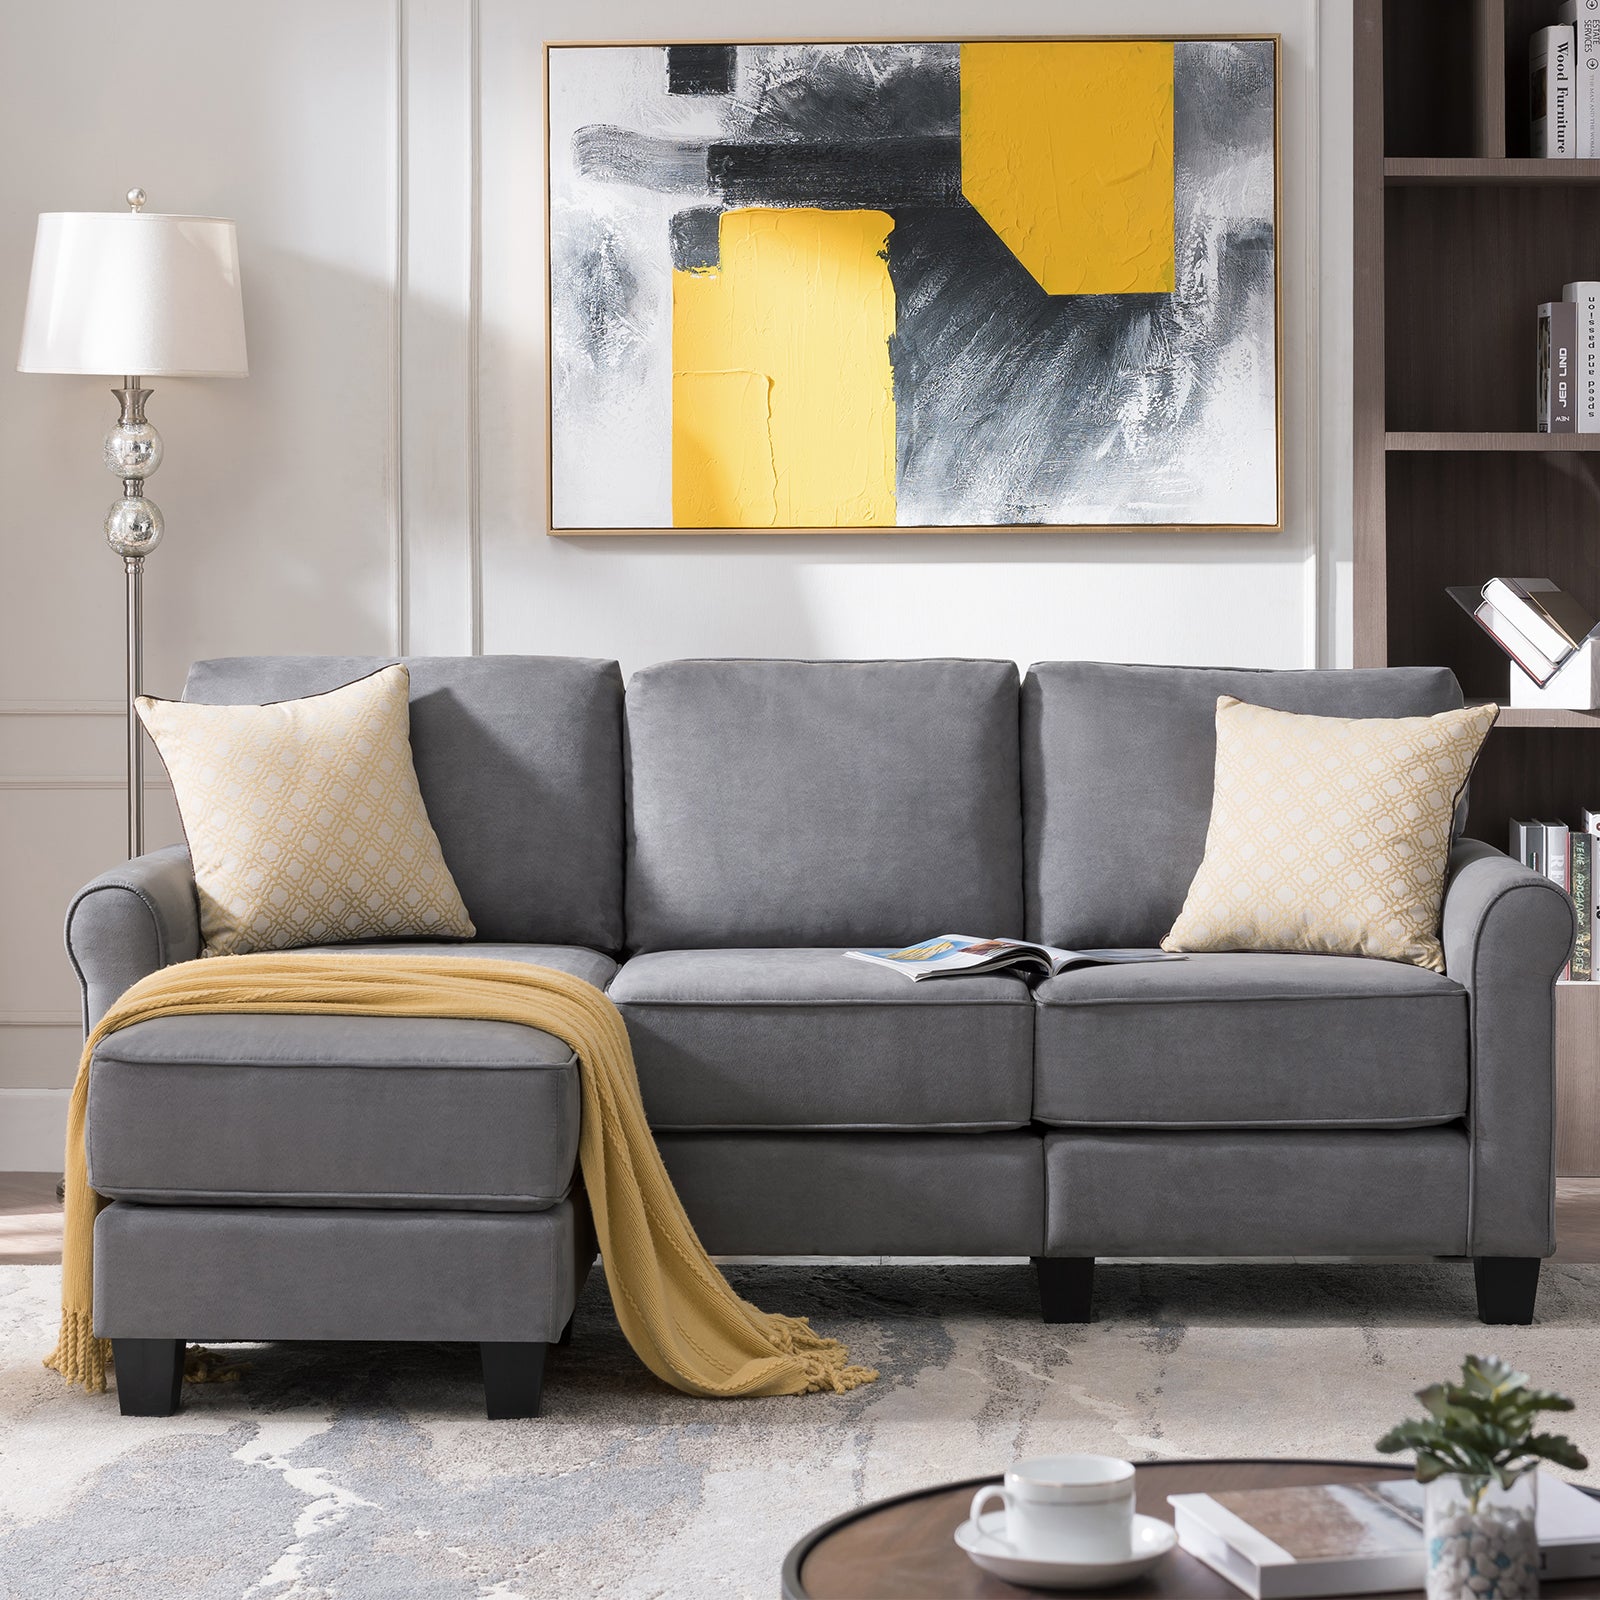 A cozy living room featuring a gray sofa with a chaise lounge, adorned with two yellow-patterned pillows and a yellow throw blanket. Behind the sofa is a modern abstract painting with yellow, black, and gray elements. A lamp and shelving unit flank the setup.